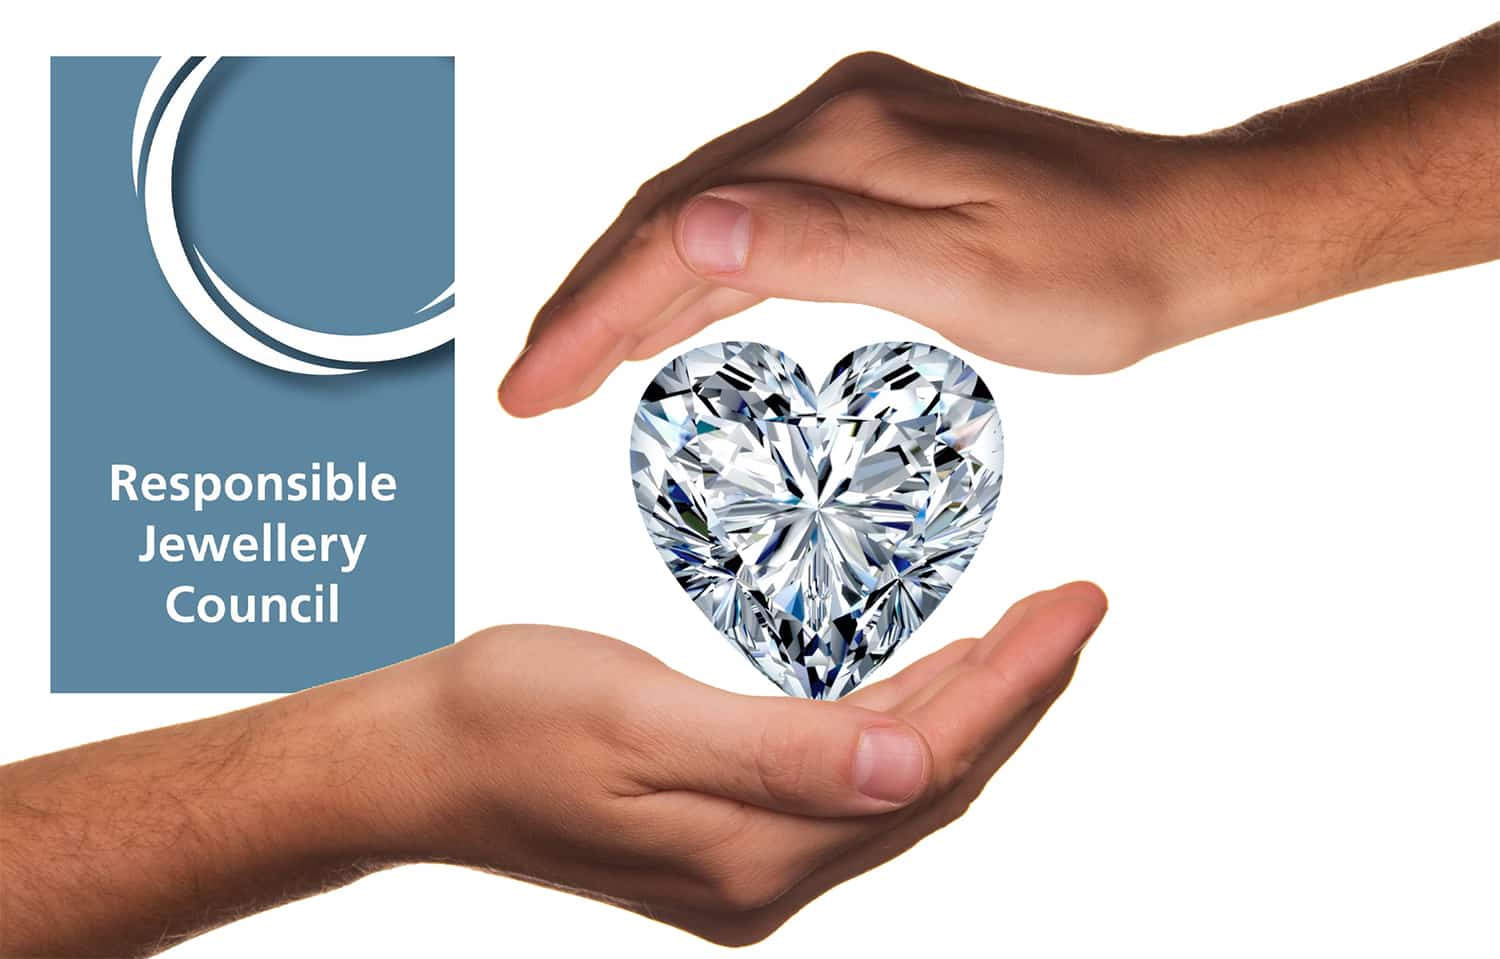 RESPONSIBLE JEWELLERY COUNCILS LOOKS TO RAISE PROFILE IN CONSUMER MARKETS (cover)